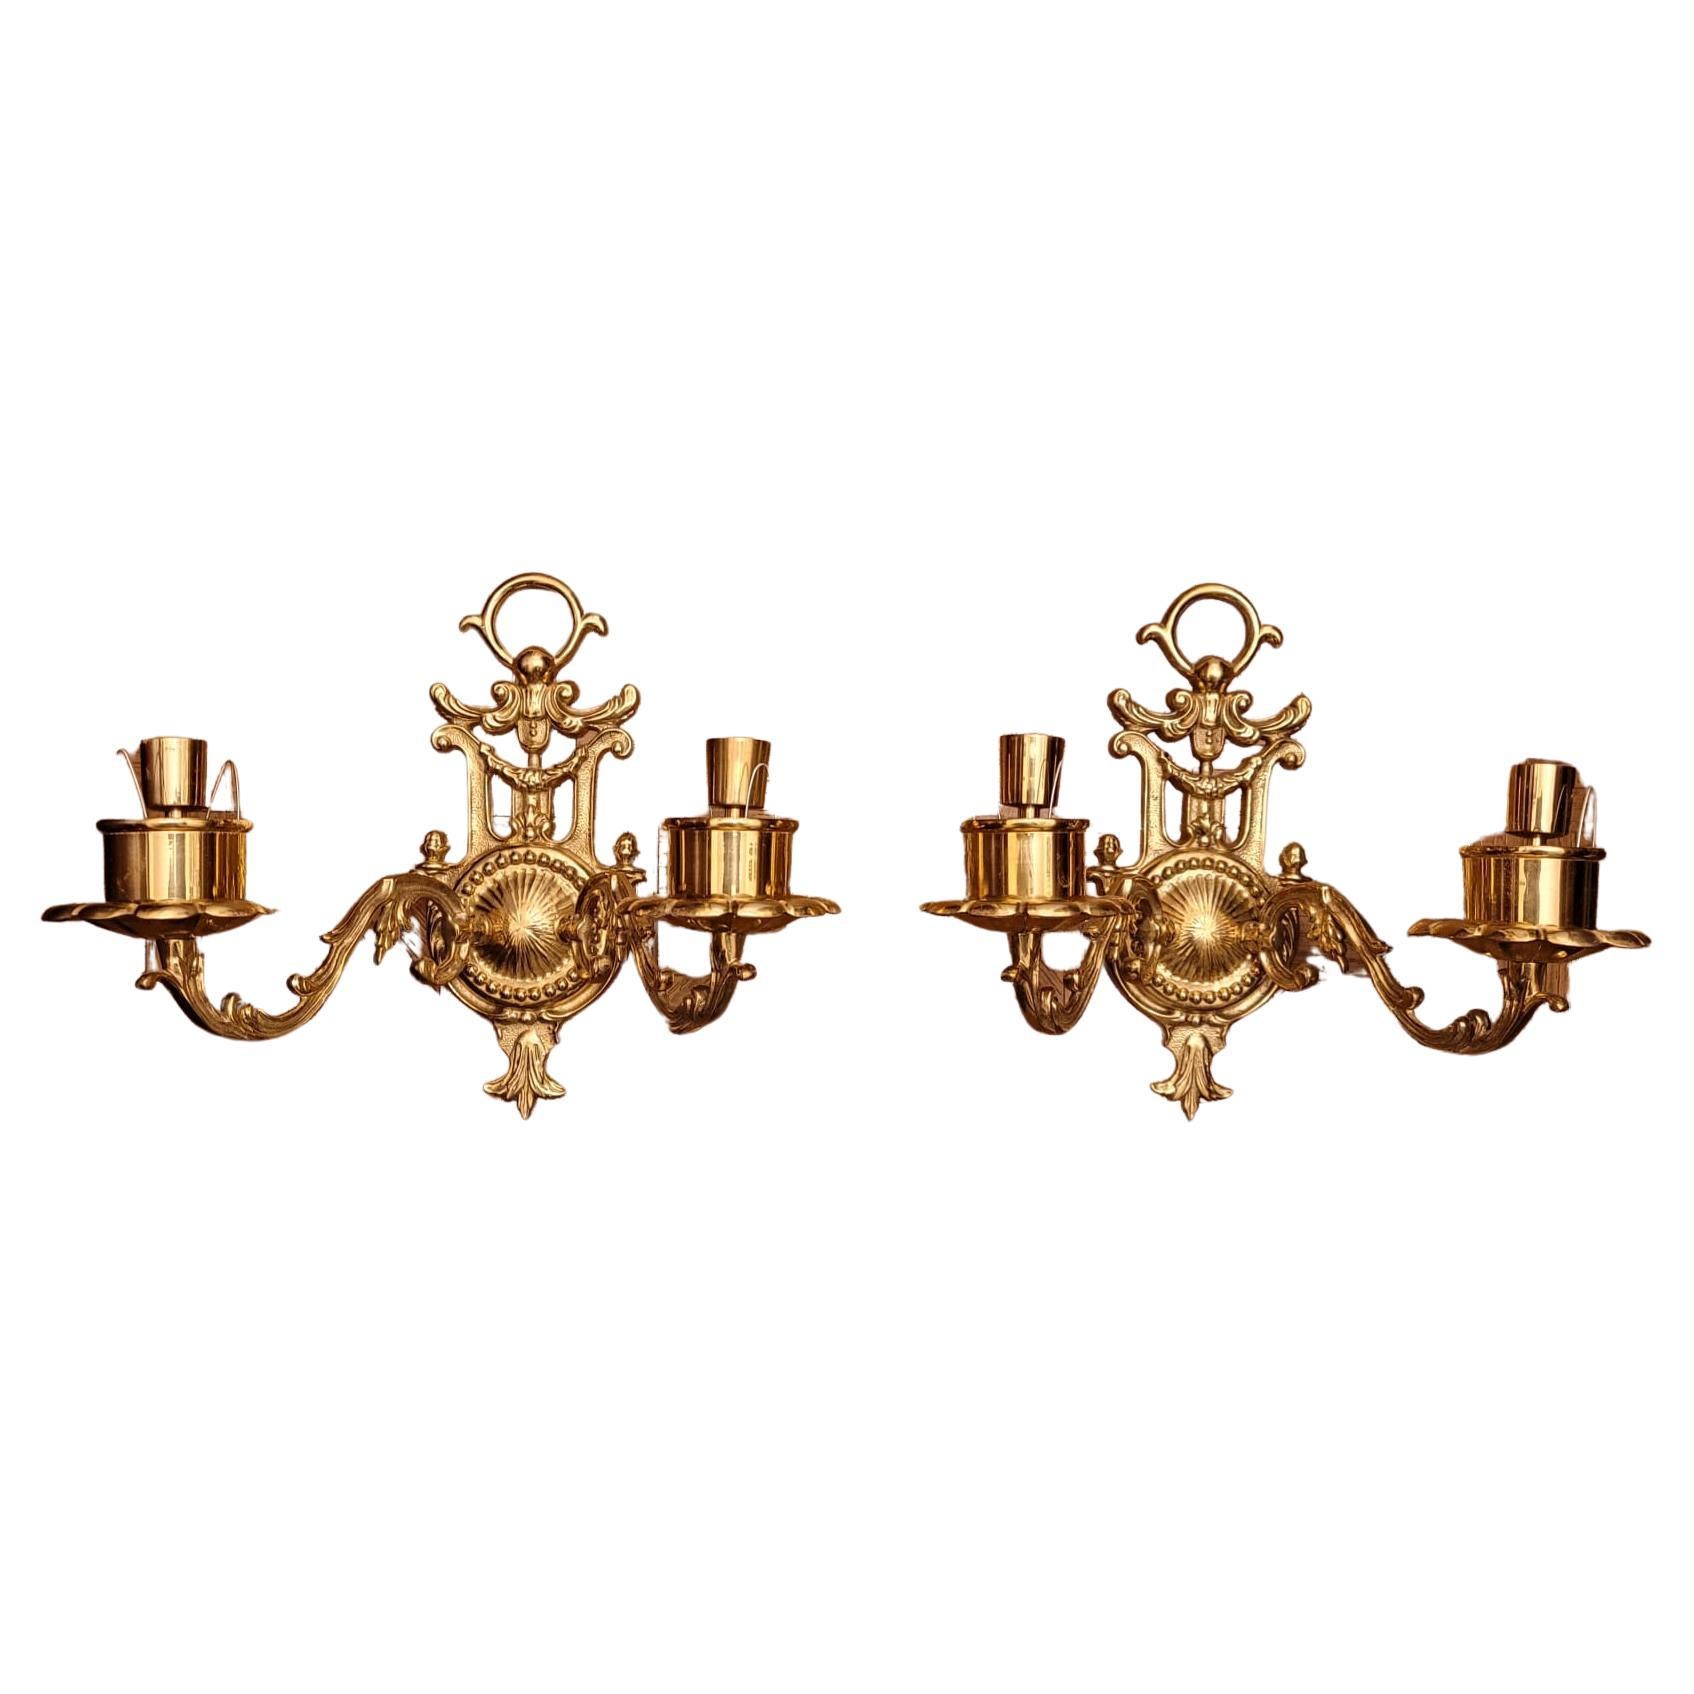 Pair of Regency Cast brass two-candle wall sconces in great condition.
Measures 12